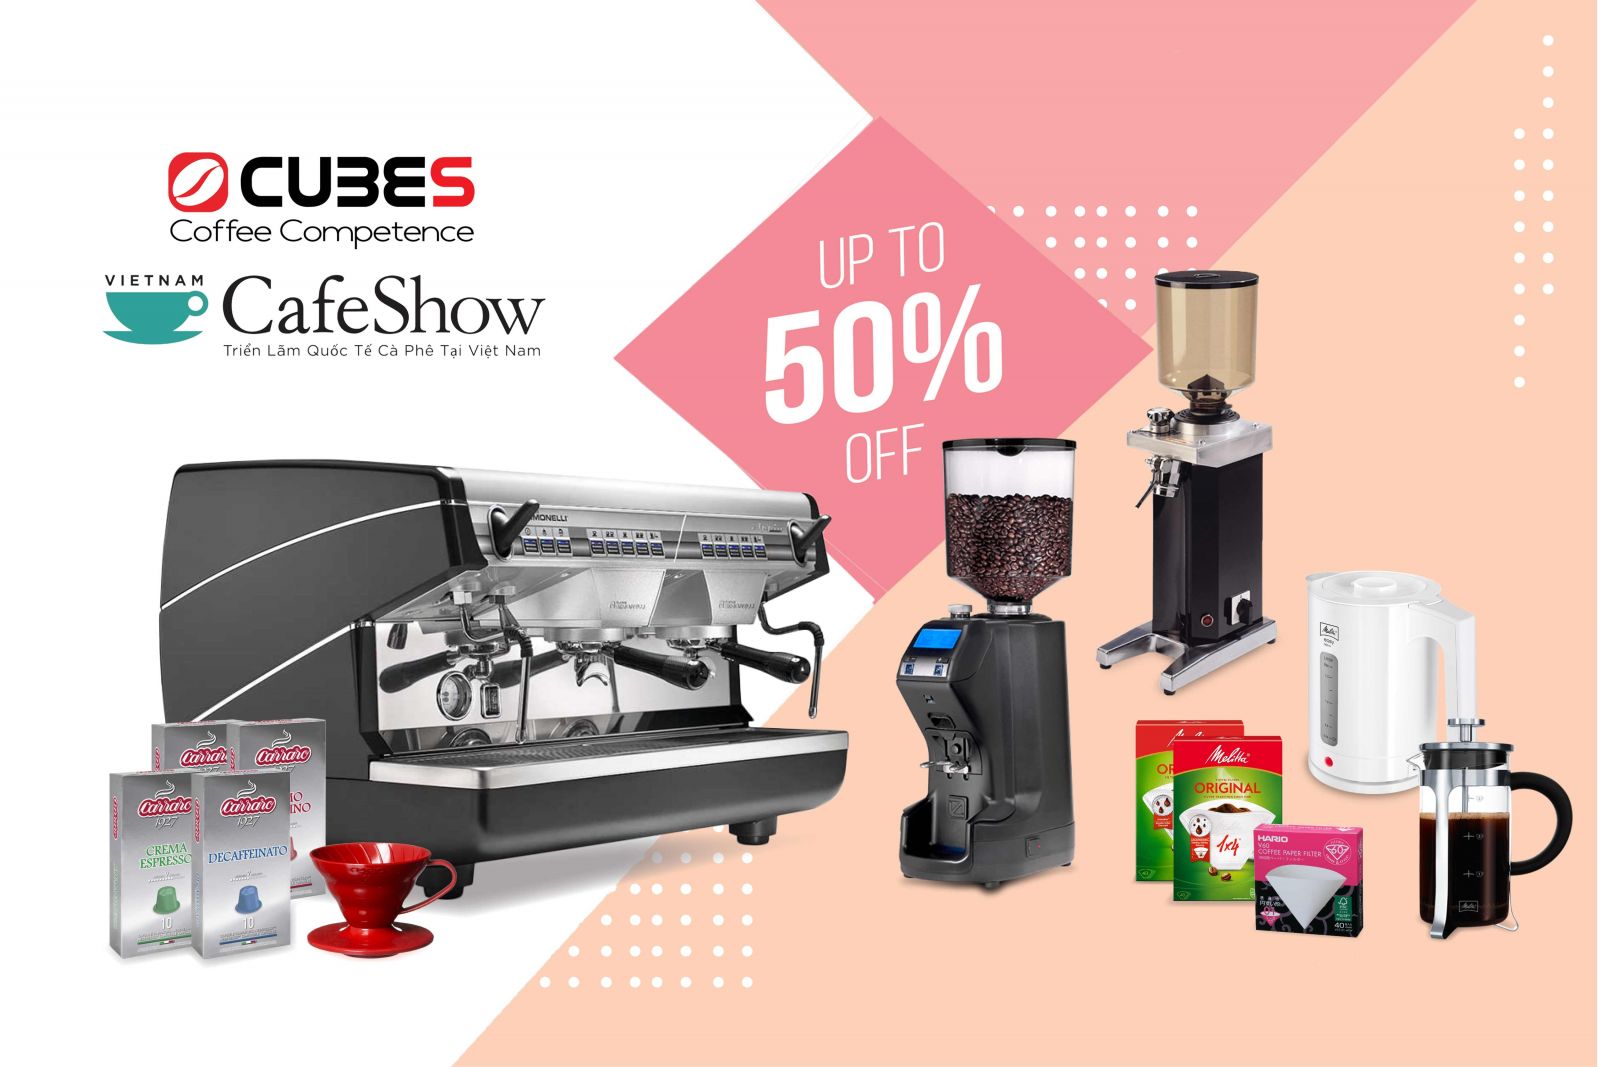 Vietnam Intl Cafe Show - Cafe Show 2019: OFFER UP TO 50 ++ AT CUBES ASIA STORE